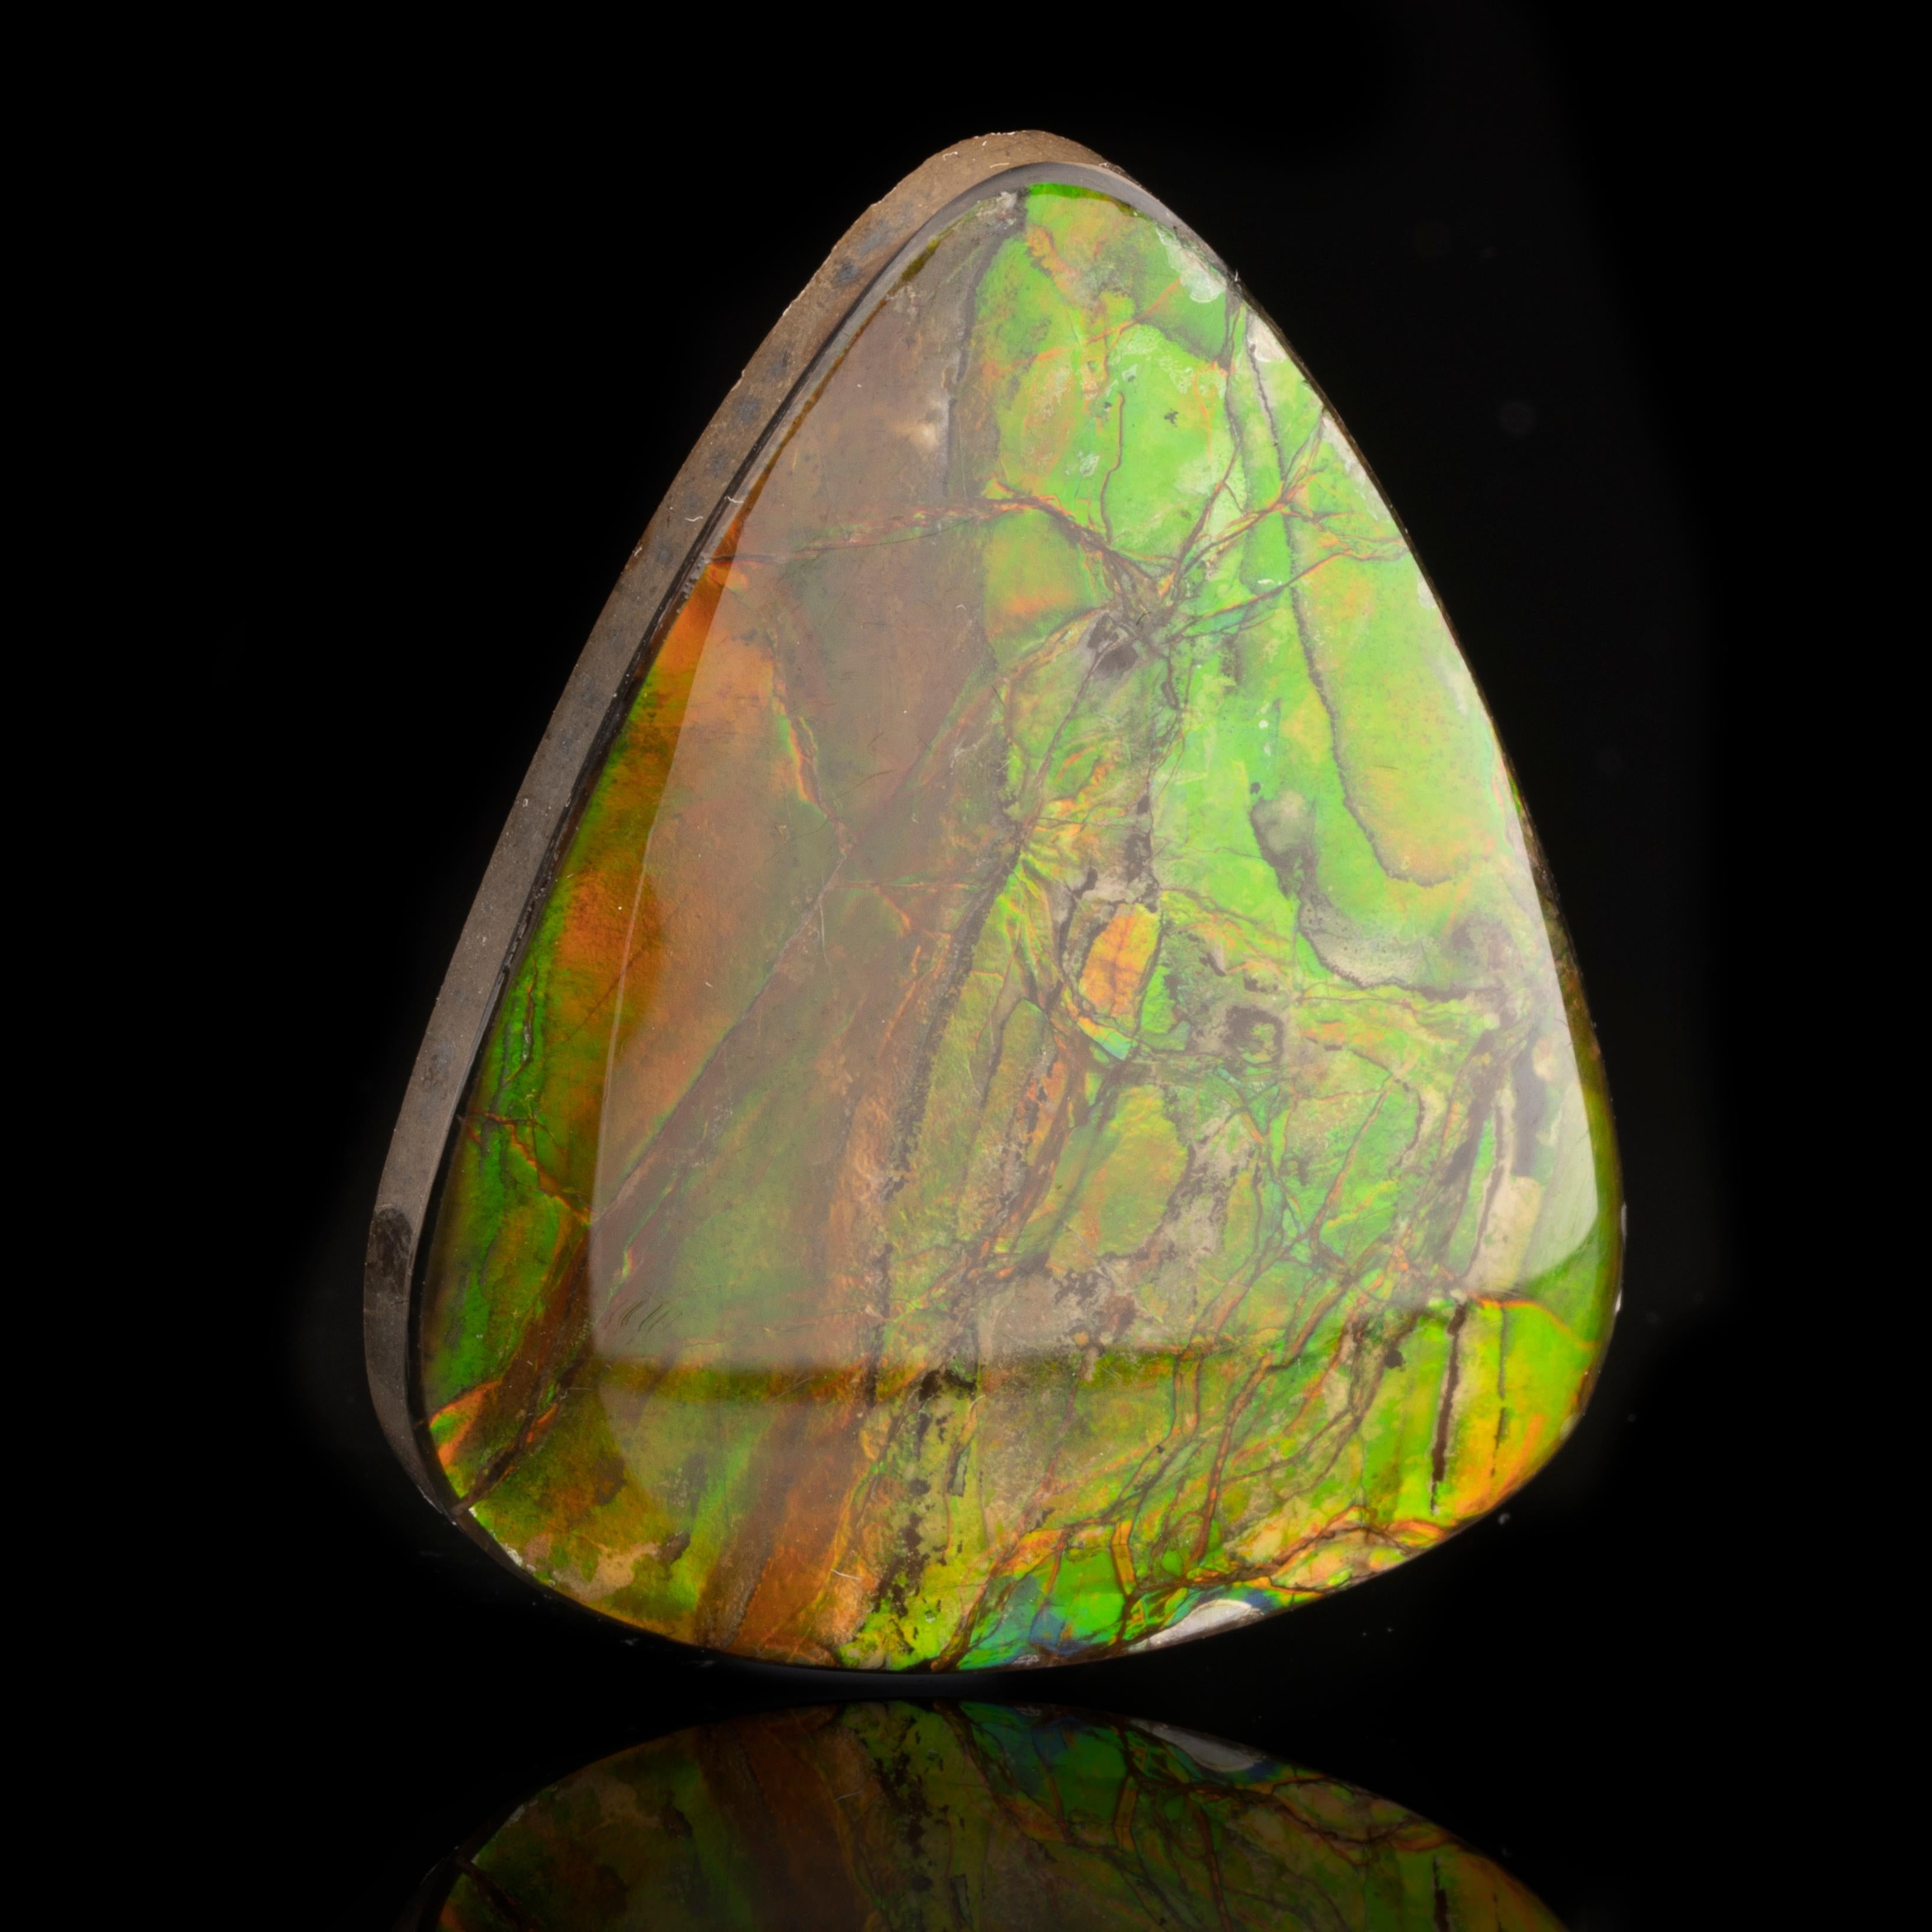 71 million year old ammolite is the rarest Canadian gemstone. Discovered in 1906 by the Geological Survey of Canada, it has since been mined to make mesmerizing, colorful cabochons and pieces of wearable art. Ammolite only comes from one location –